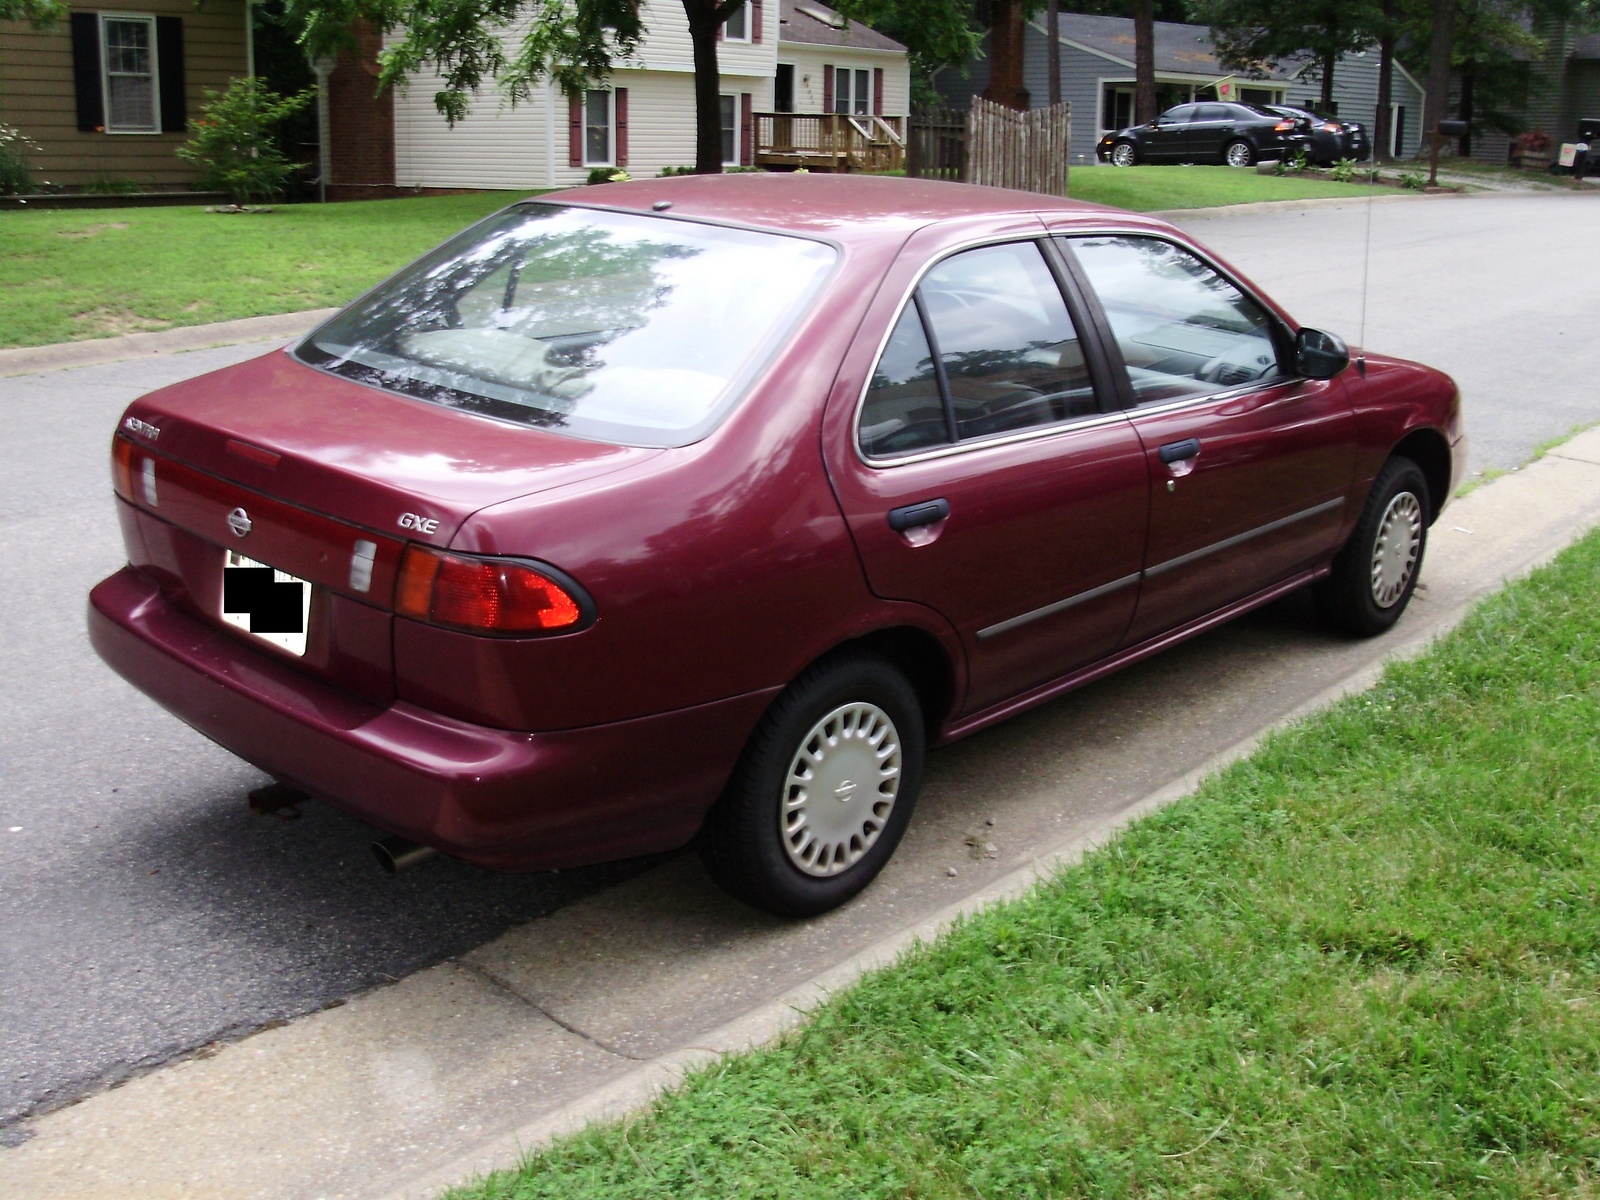 1997 Nissan sentra gxe specifications #1